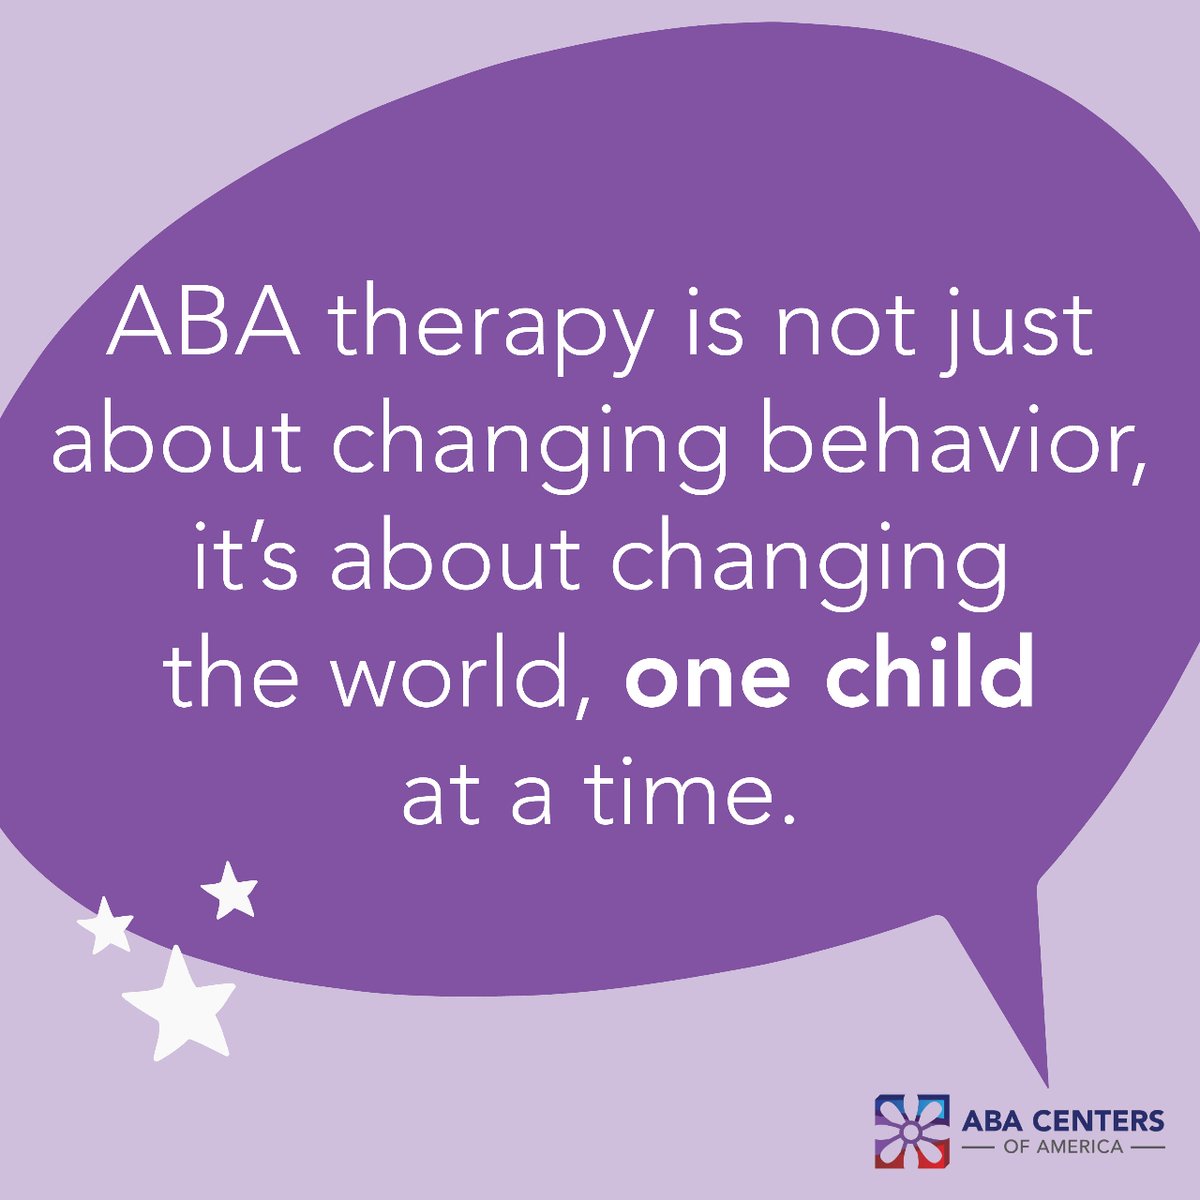 ABA therapy is not just about changing behavior, it's about changing the world, one child at a time. 

#abacentersofamerica #mondaymotivation #mondayvibes #changingtheworld #onechildatatime #abaforgood